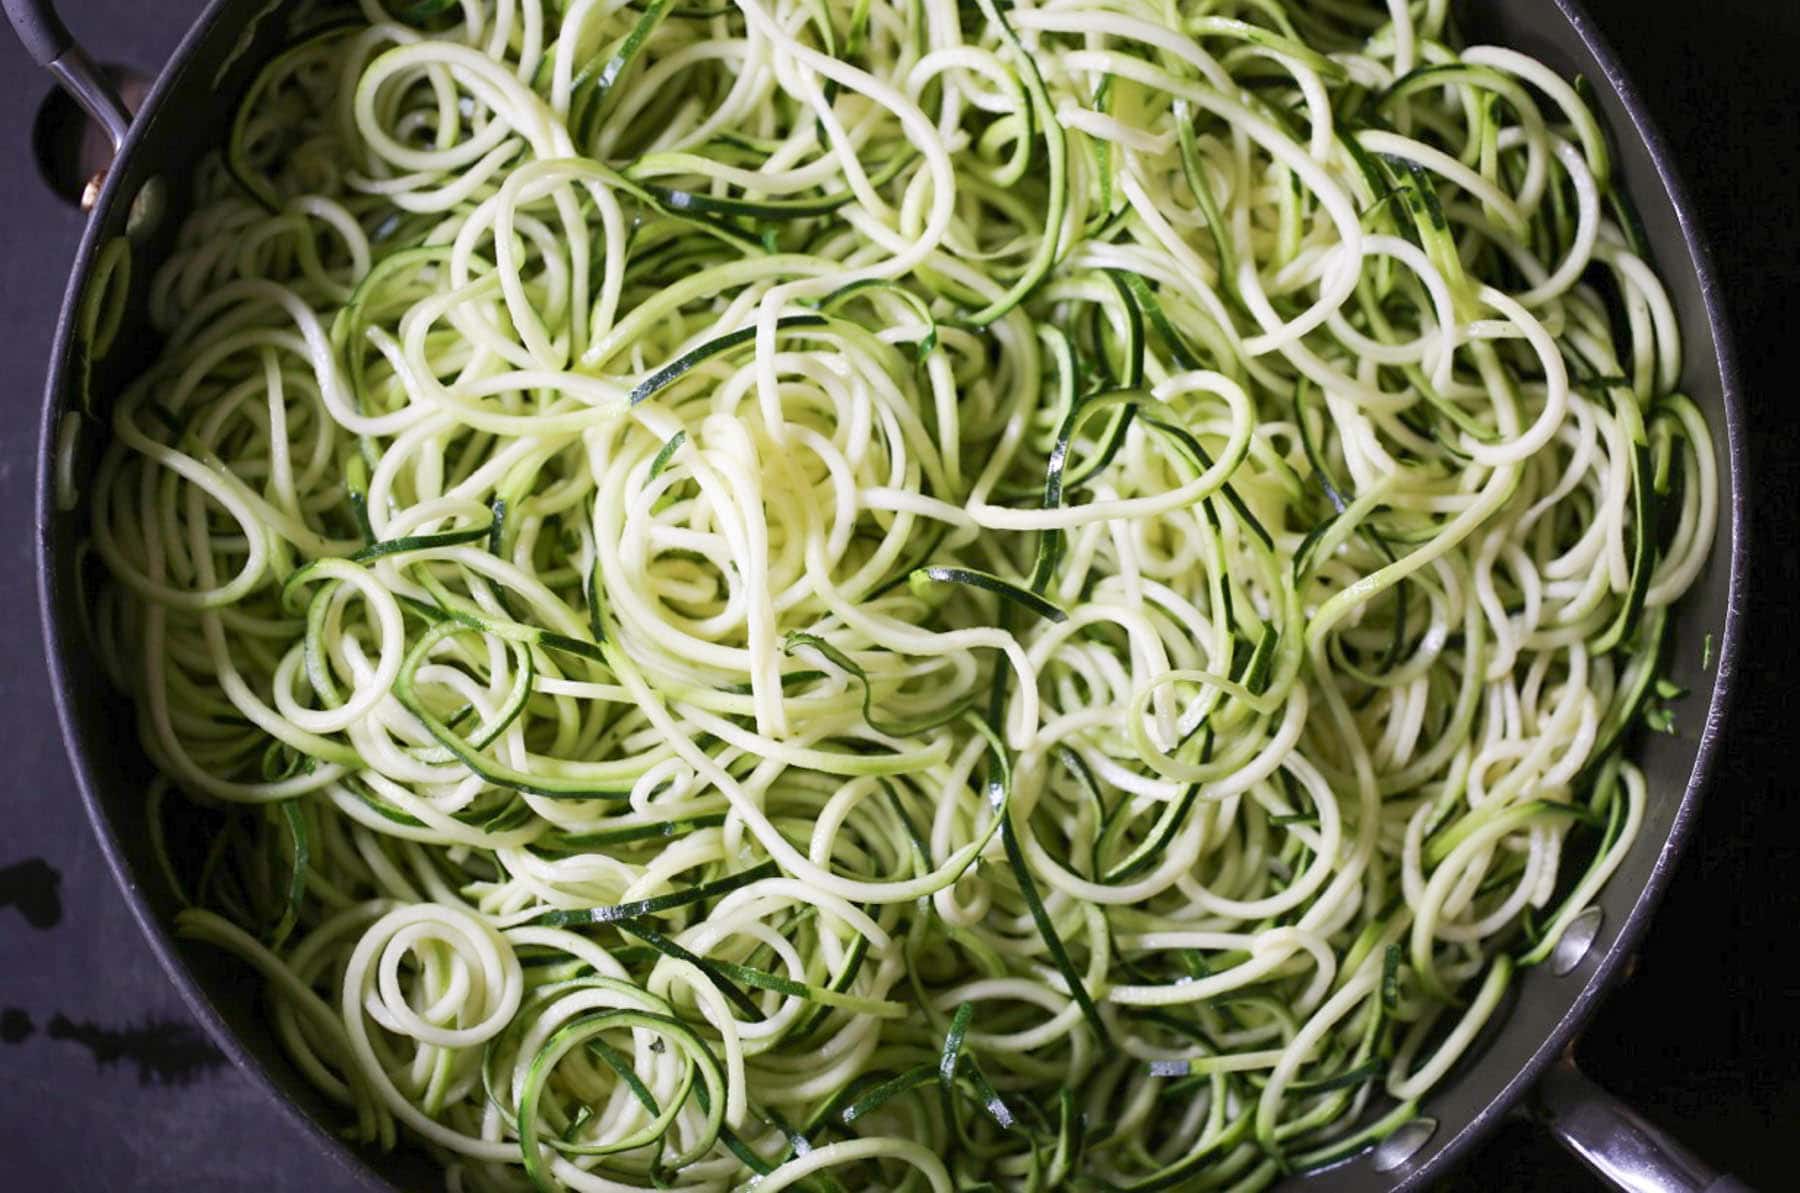 Uncooked zucchini noodles in the pan.